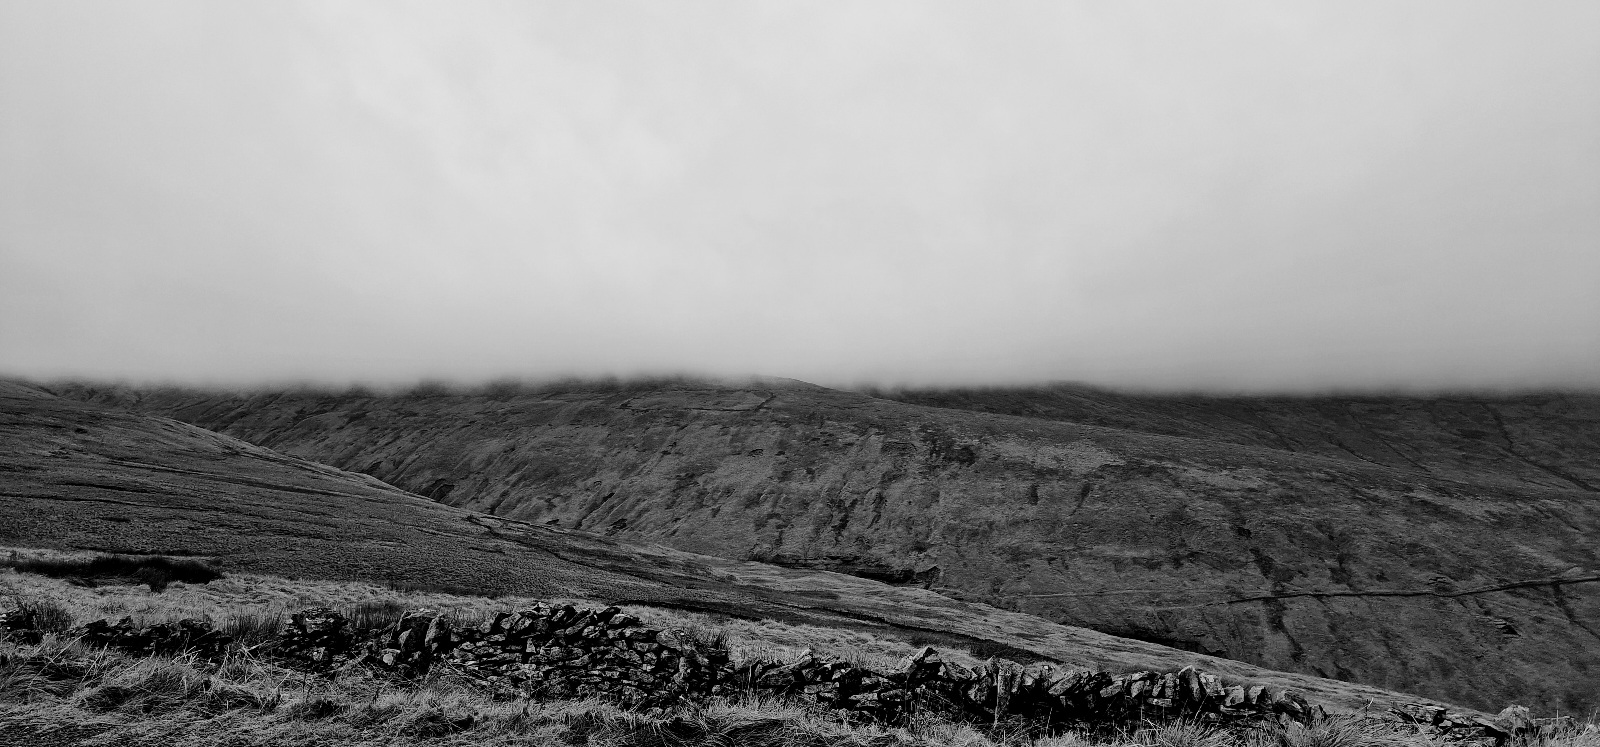 Dales and clouds